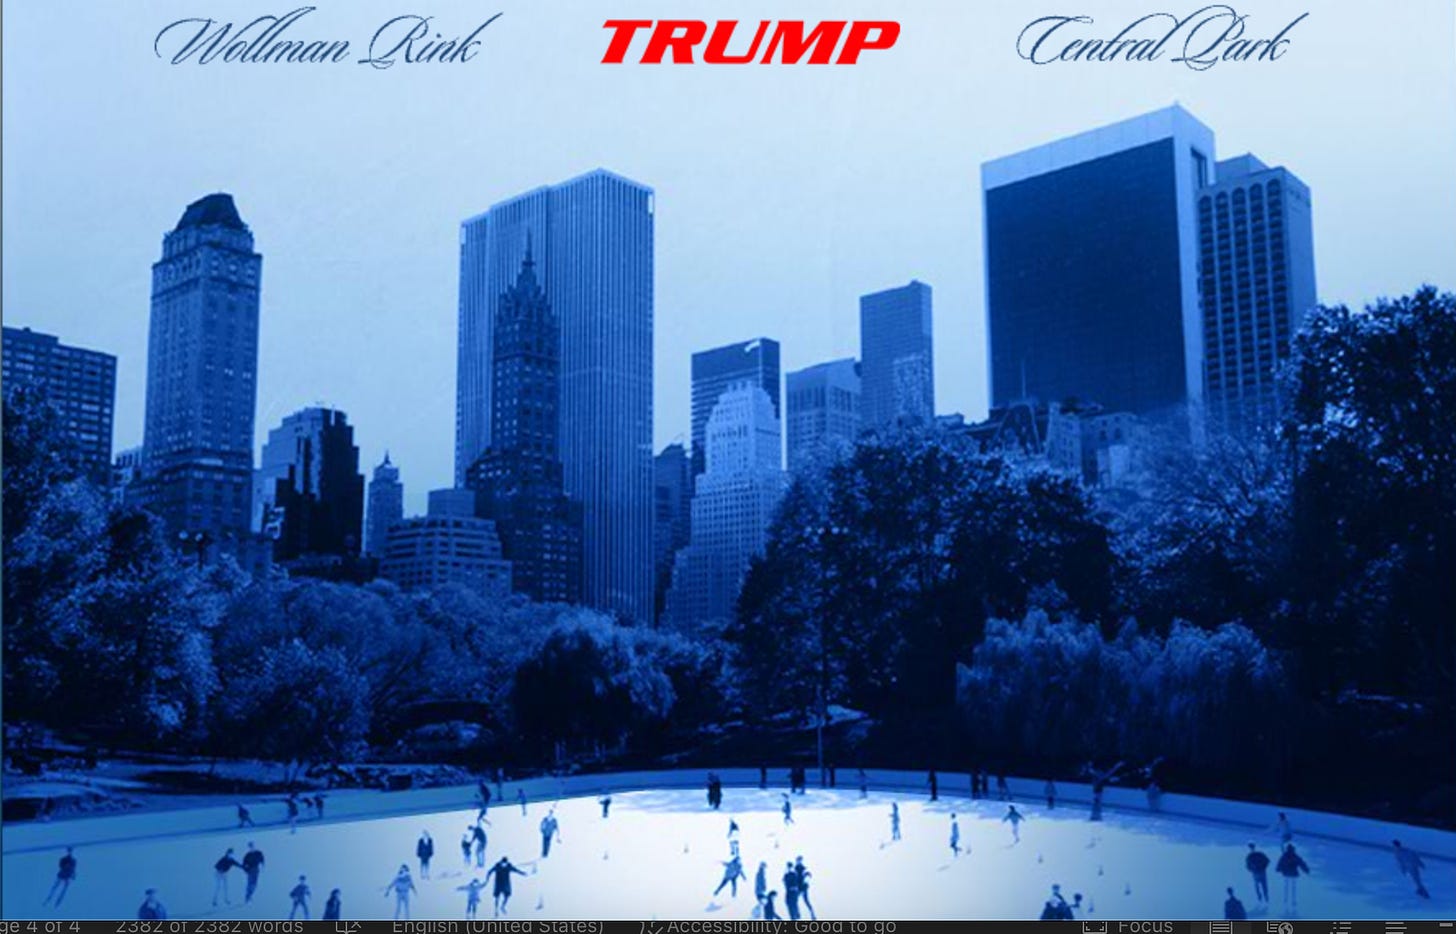 A screenshot of the Wollman Rink site. It is a blue tinged photo of the rink with the city in the background. "Wollman Rink" and "Central Park" are written in blue, cursive font on either side of "TRUMP" written in red capital letters. .